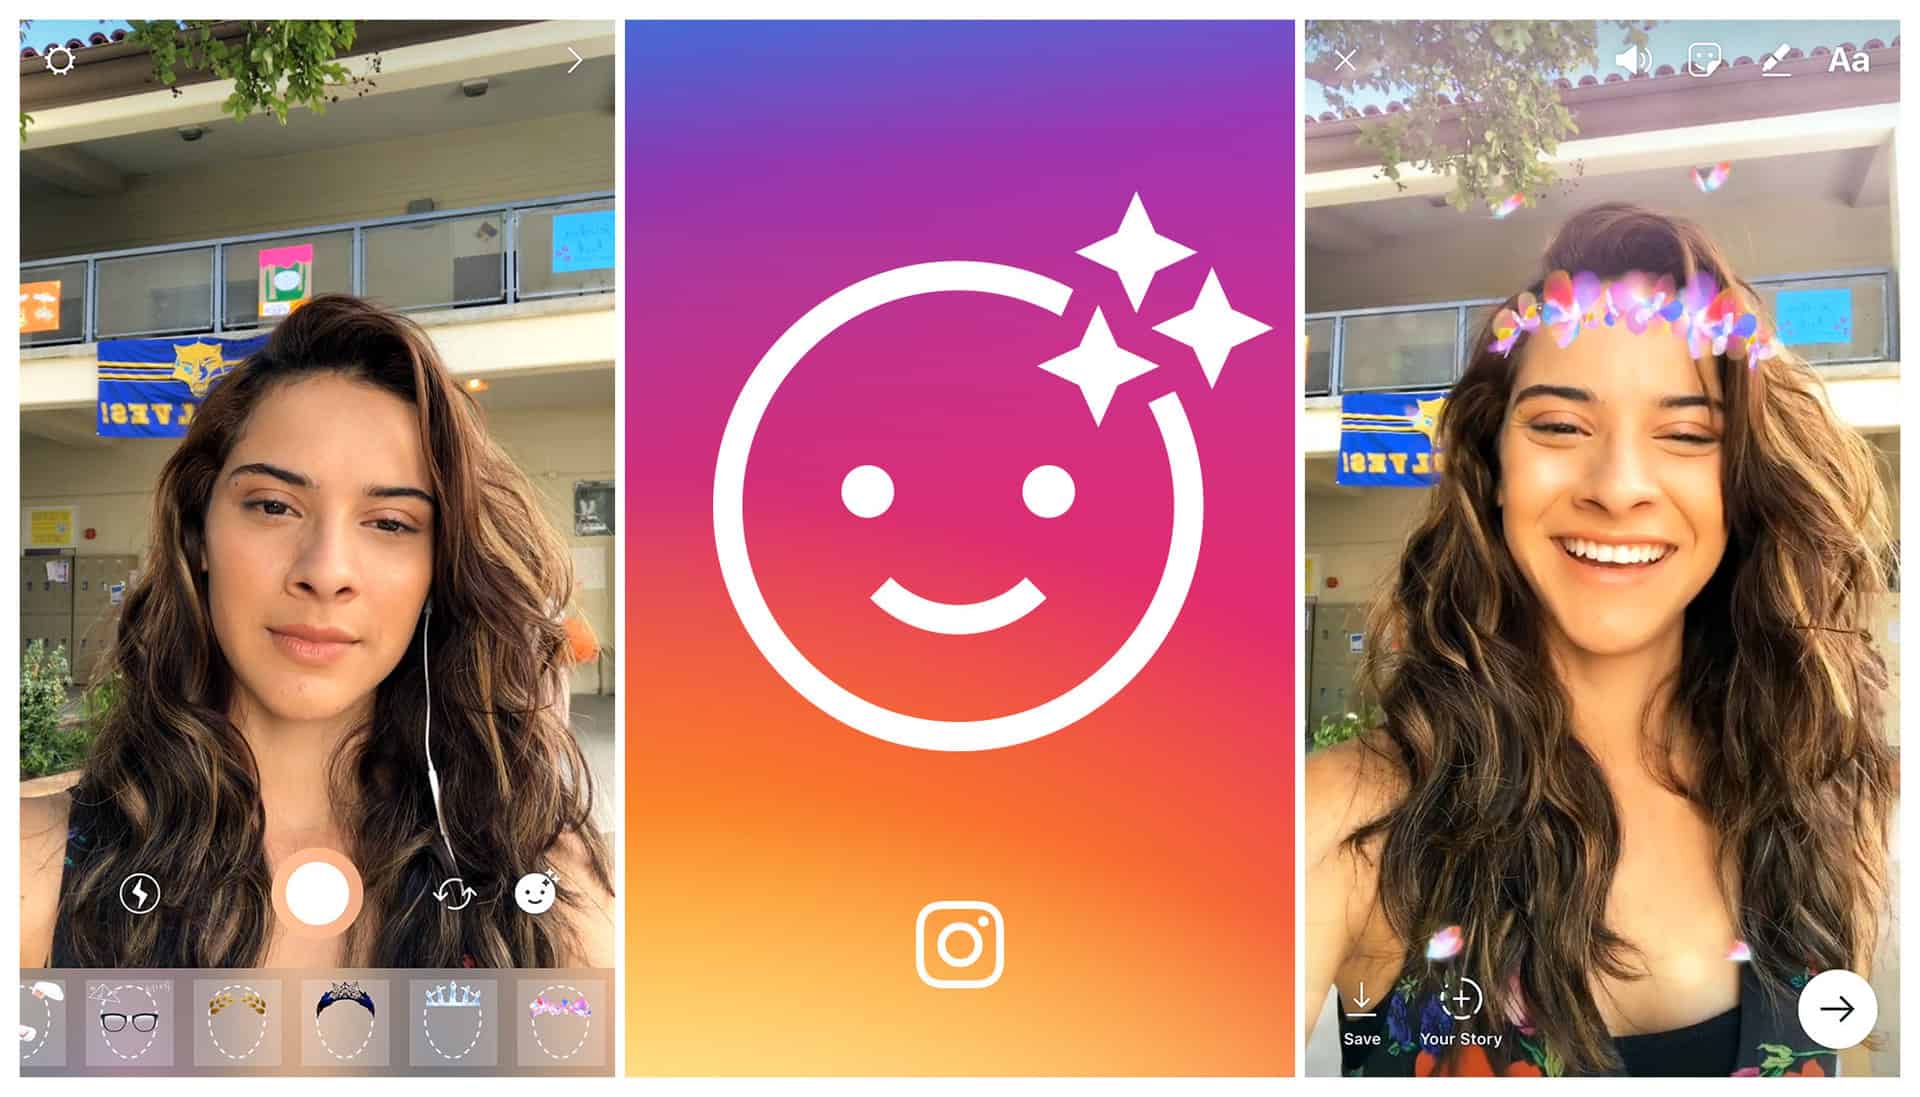 Instagram face filters